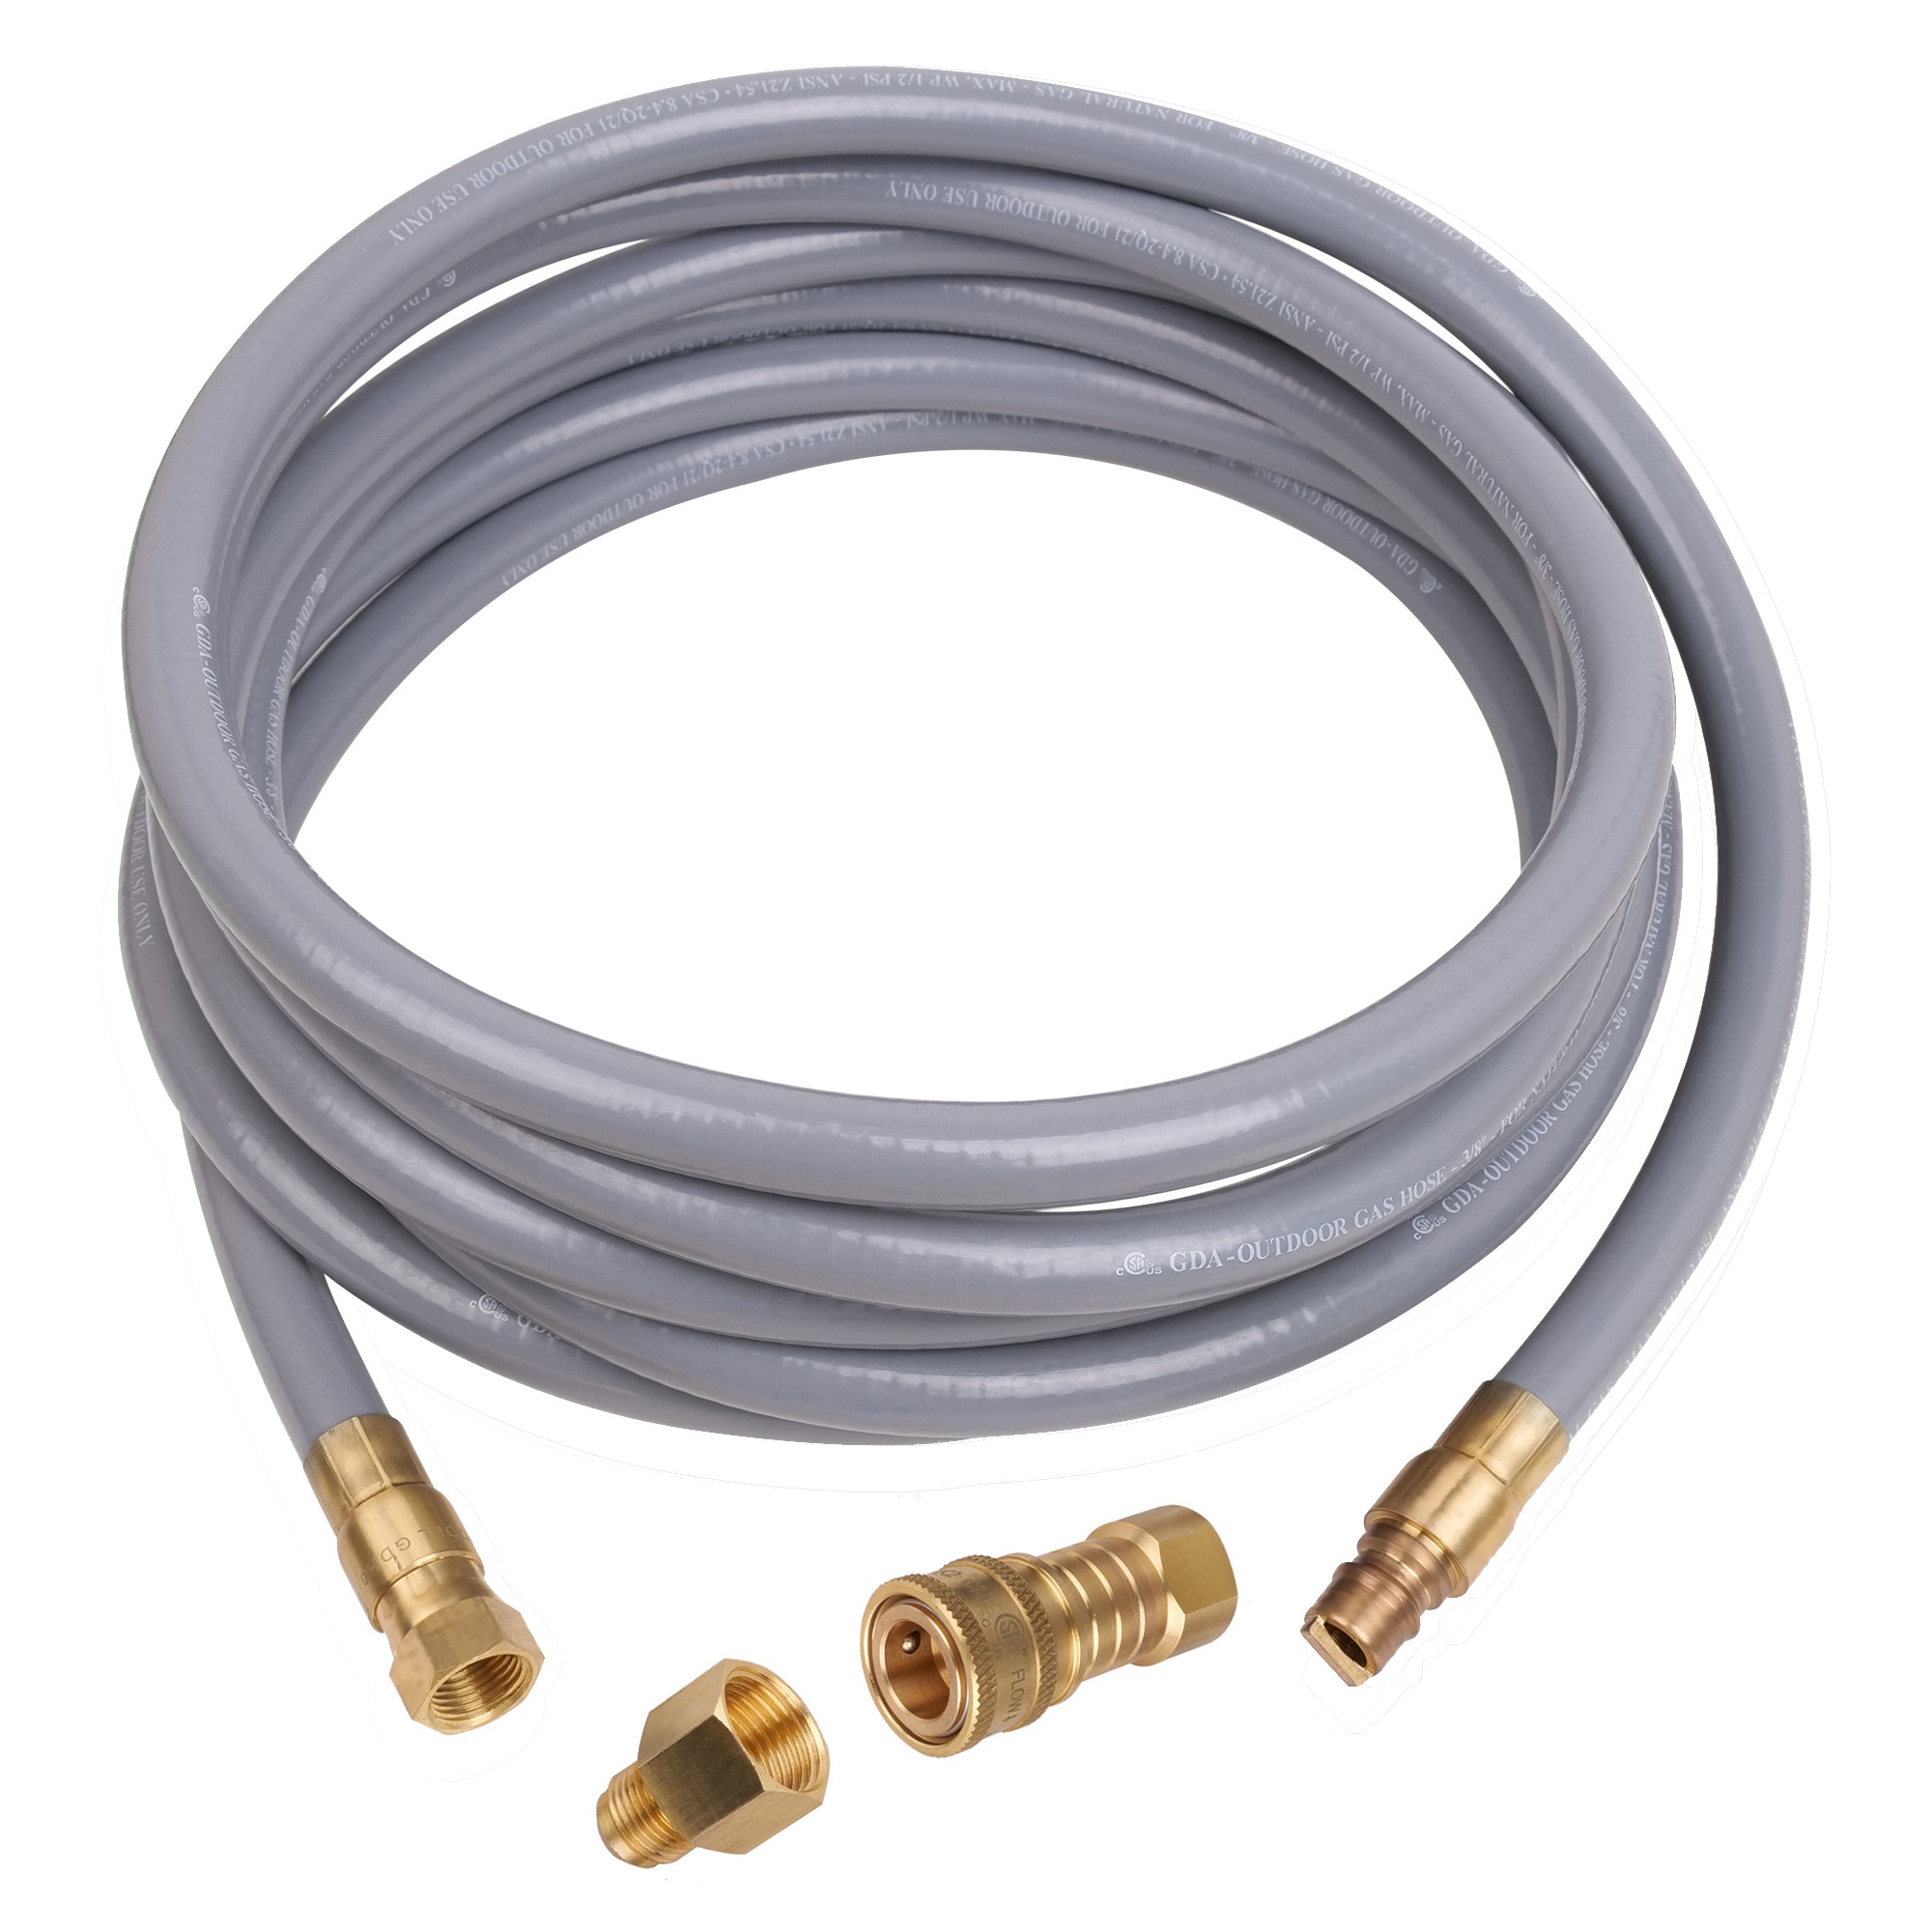 Empava 15-ft 3/8-in Natural Gas Hose with Quick Connect Fittings